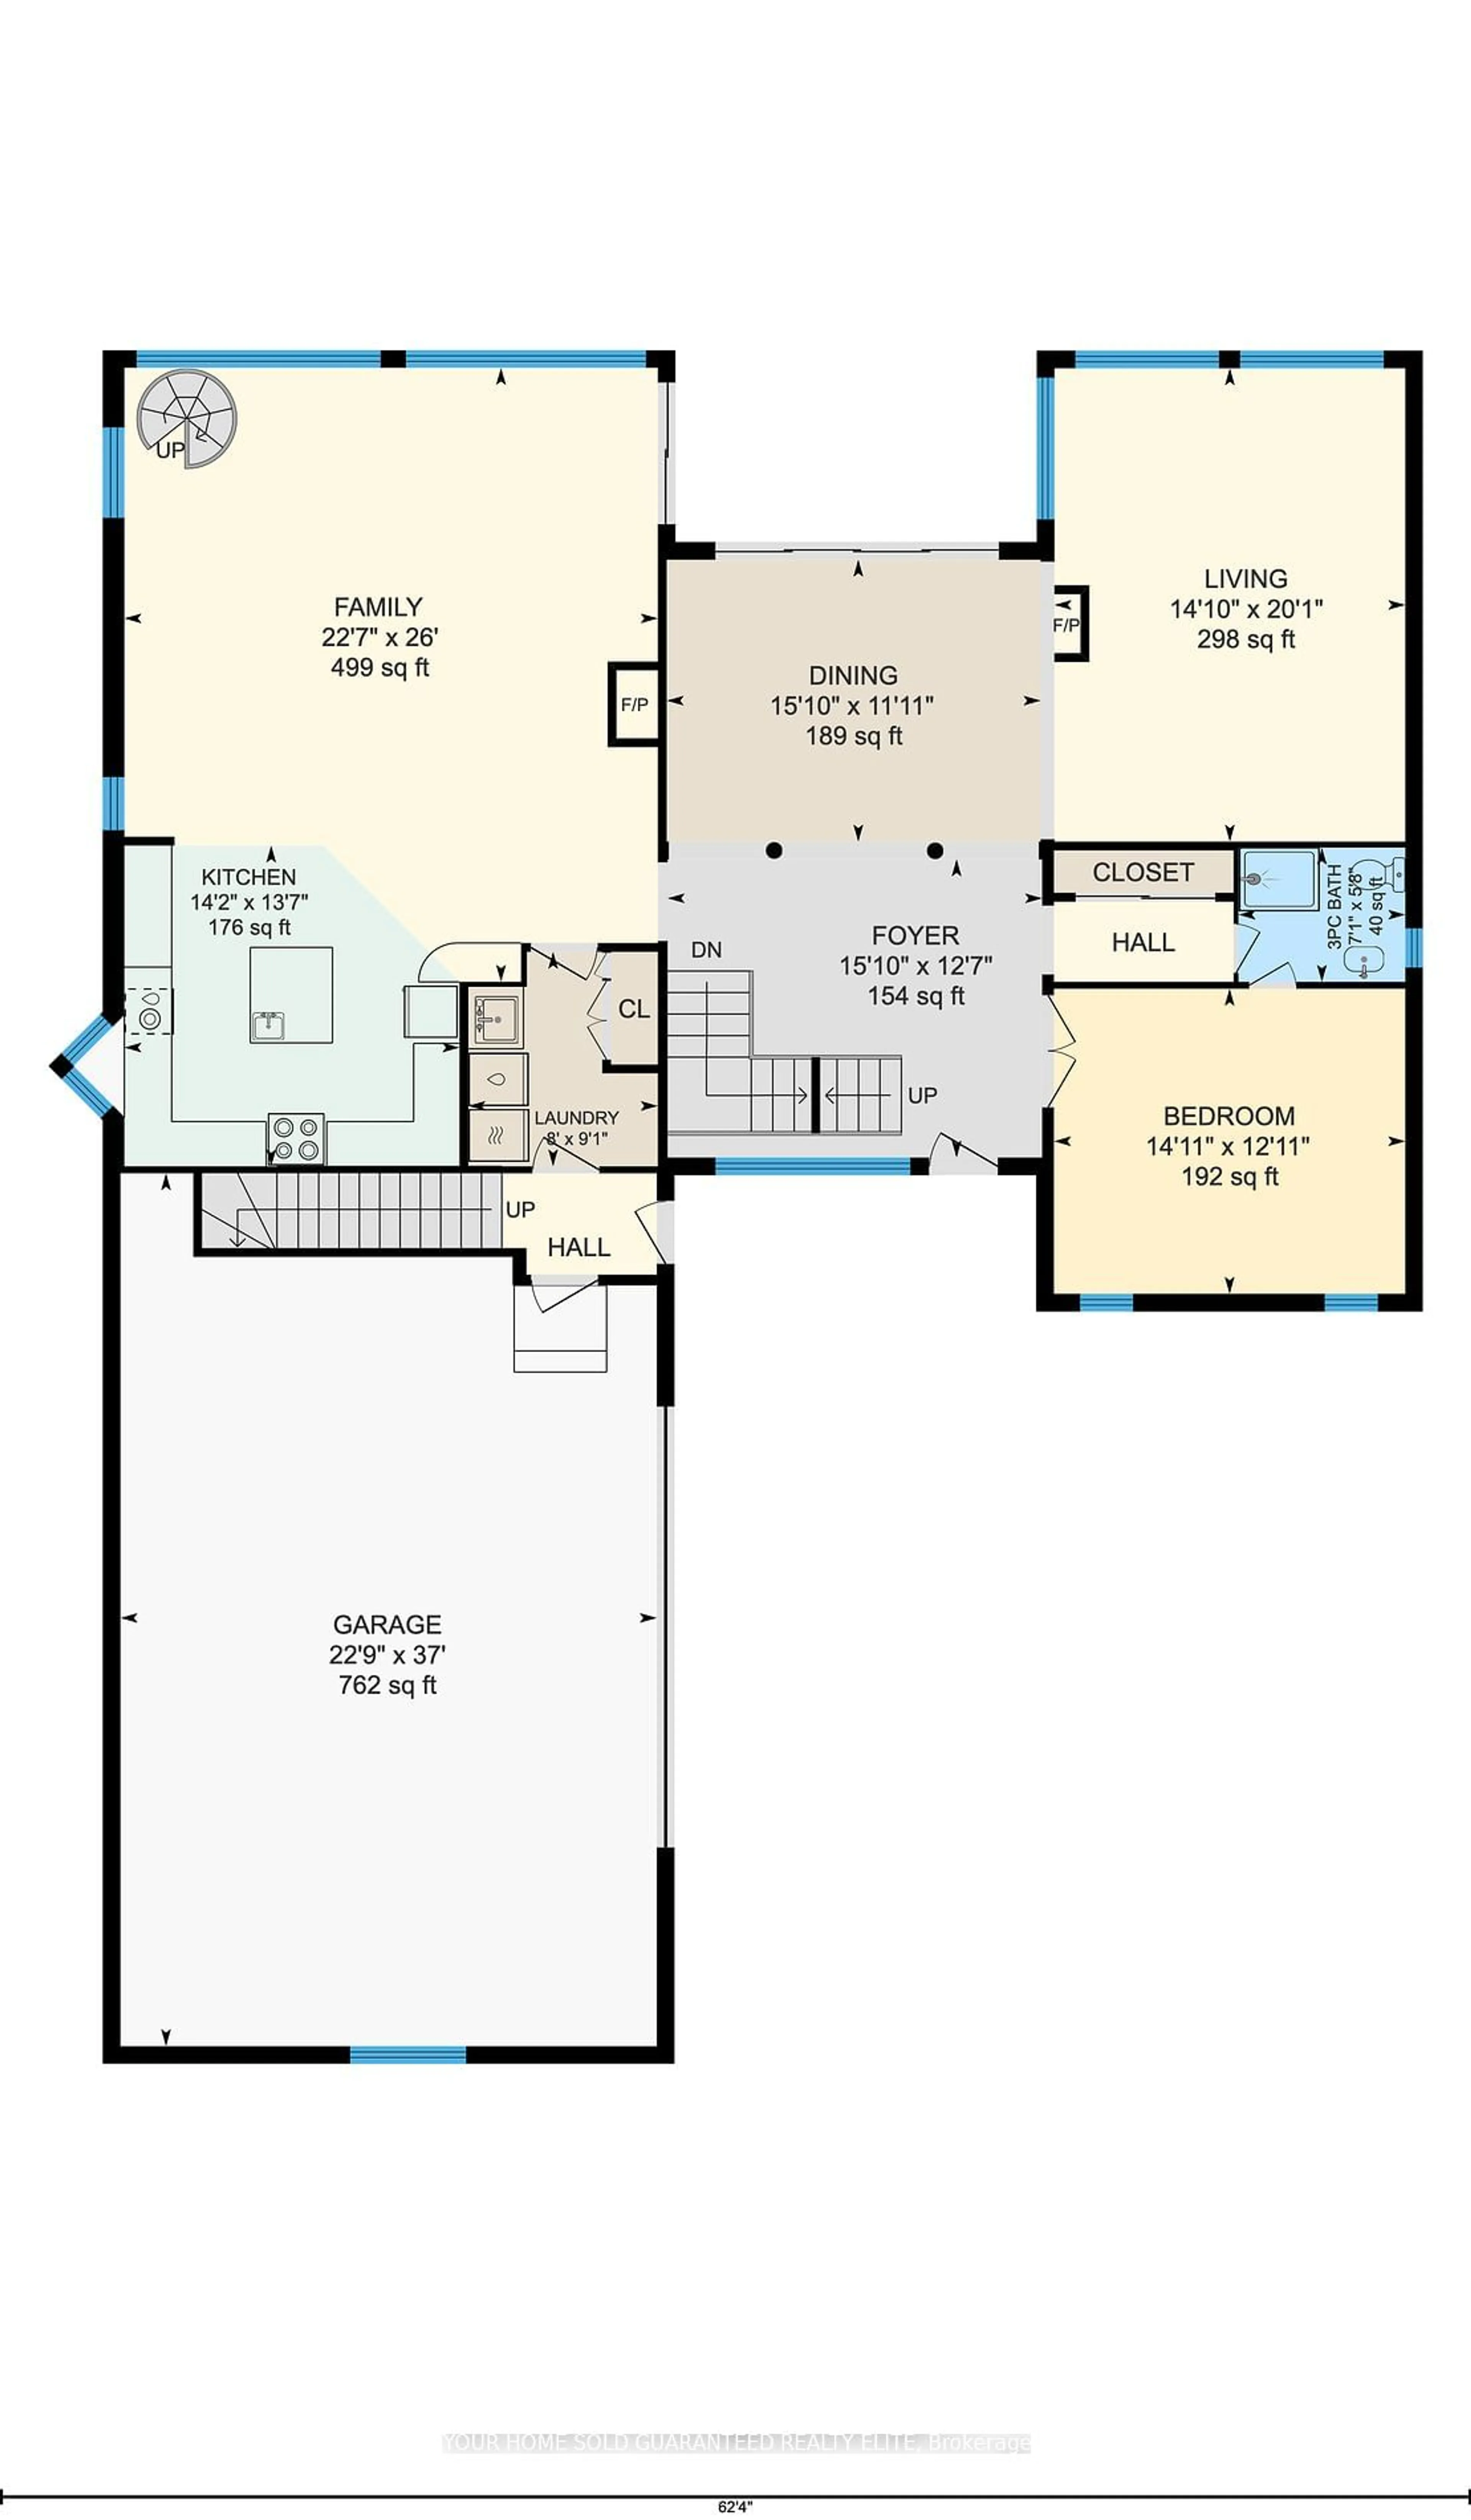 Floor plan for 134 Olive St, Grimsby Ontario L3M 5C8